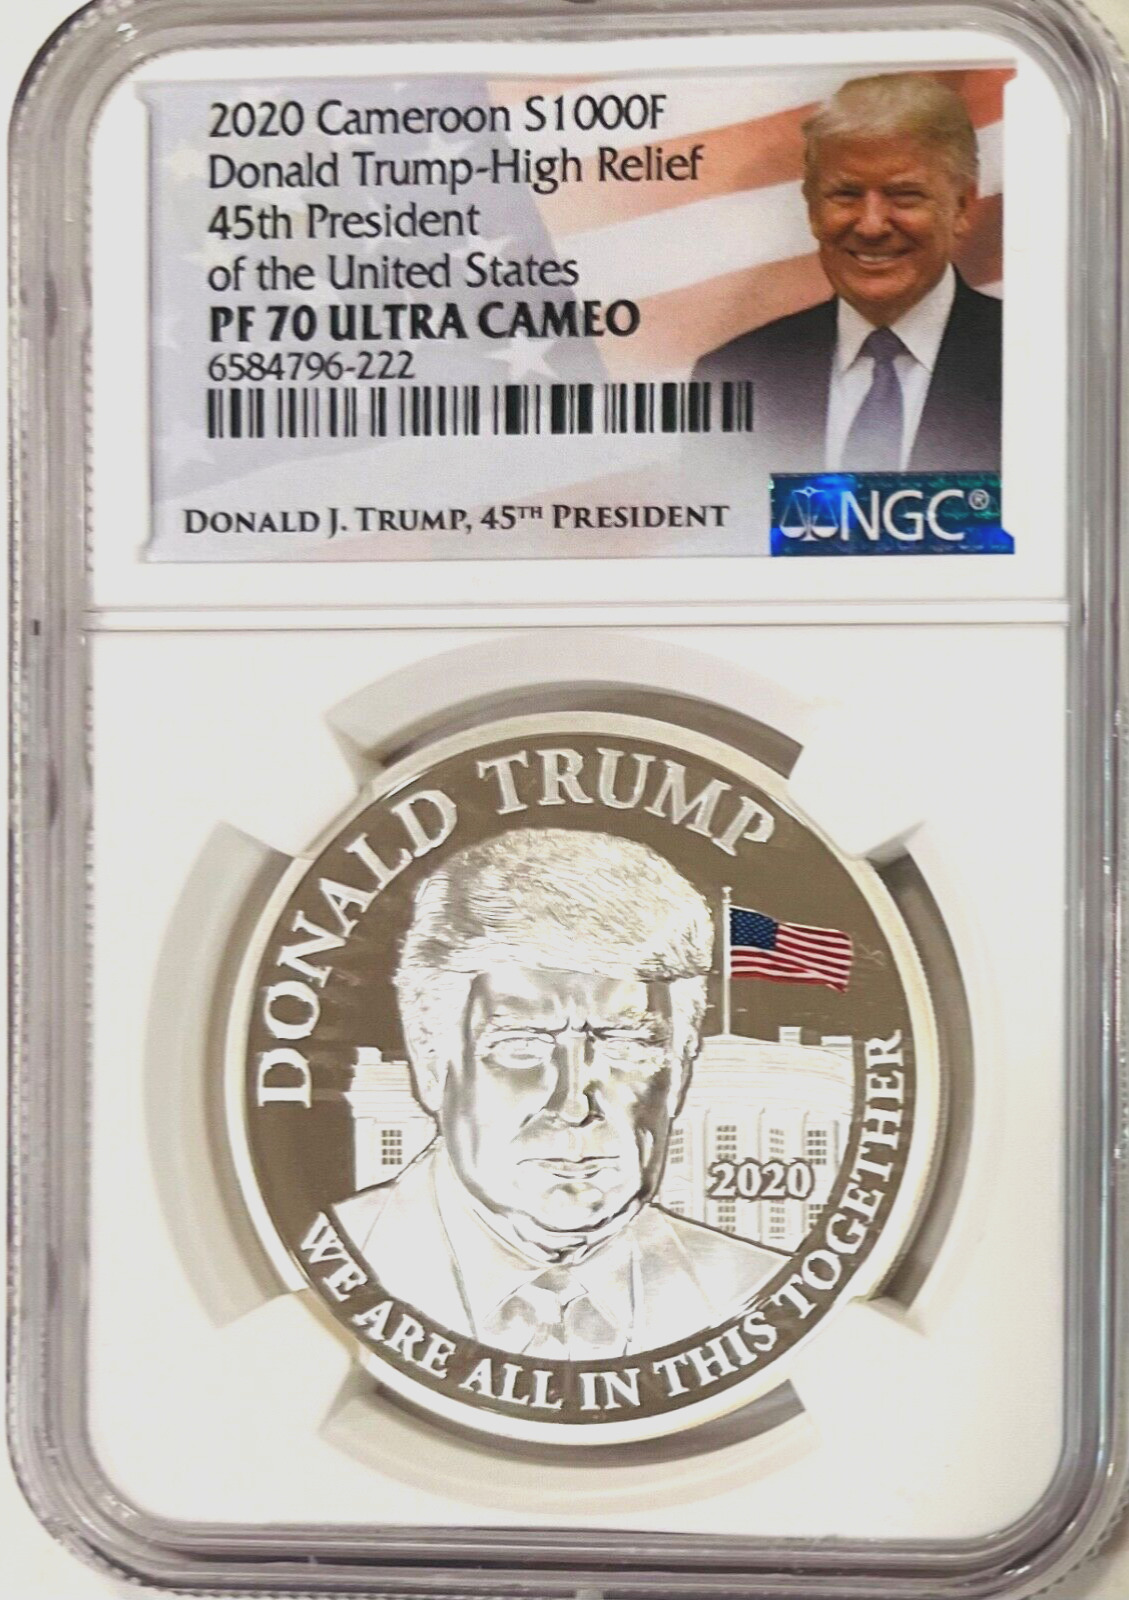 2020 Cameroon S1000F DONALD TRUMP 1 Oz High Relief Silver Coin  NGC PF70  🇨🇲